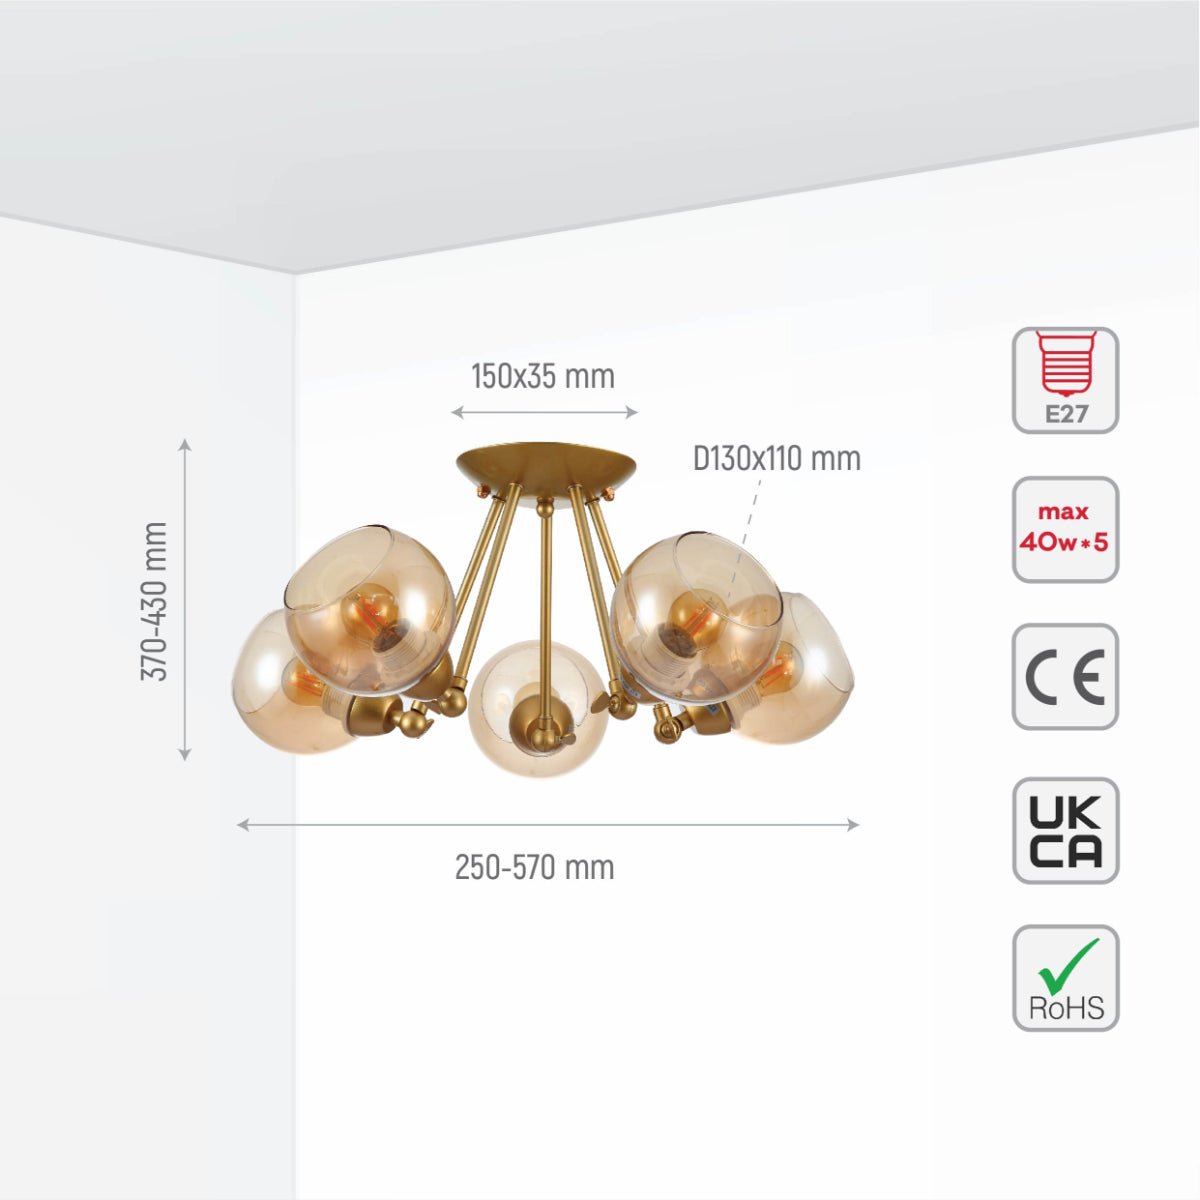 Size and specs of Gold Hinged Metal Amber Dome Glass Ceiling Light with E27 Fittings | TEKLED 159-17650